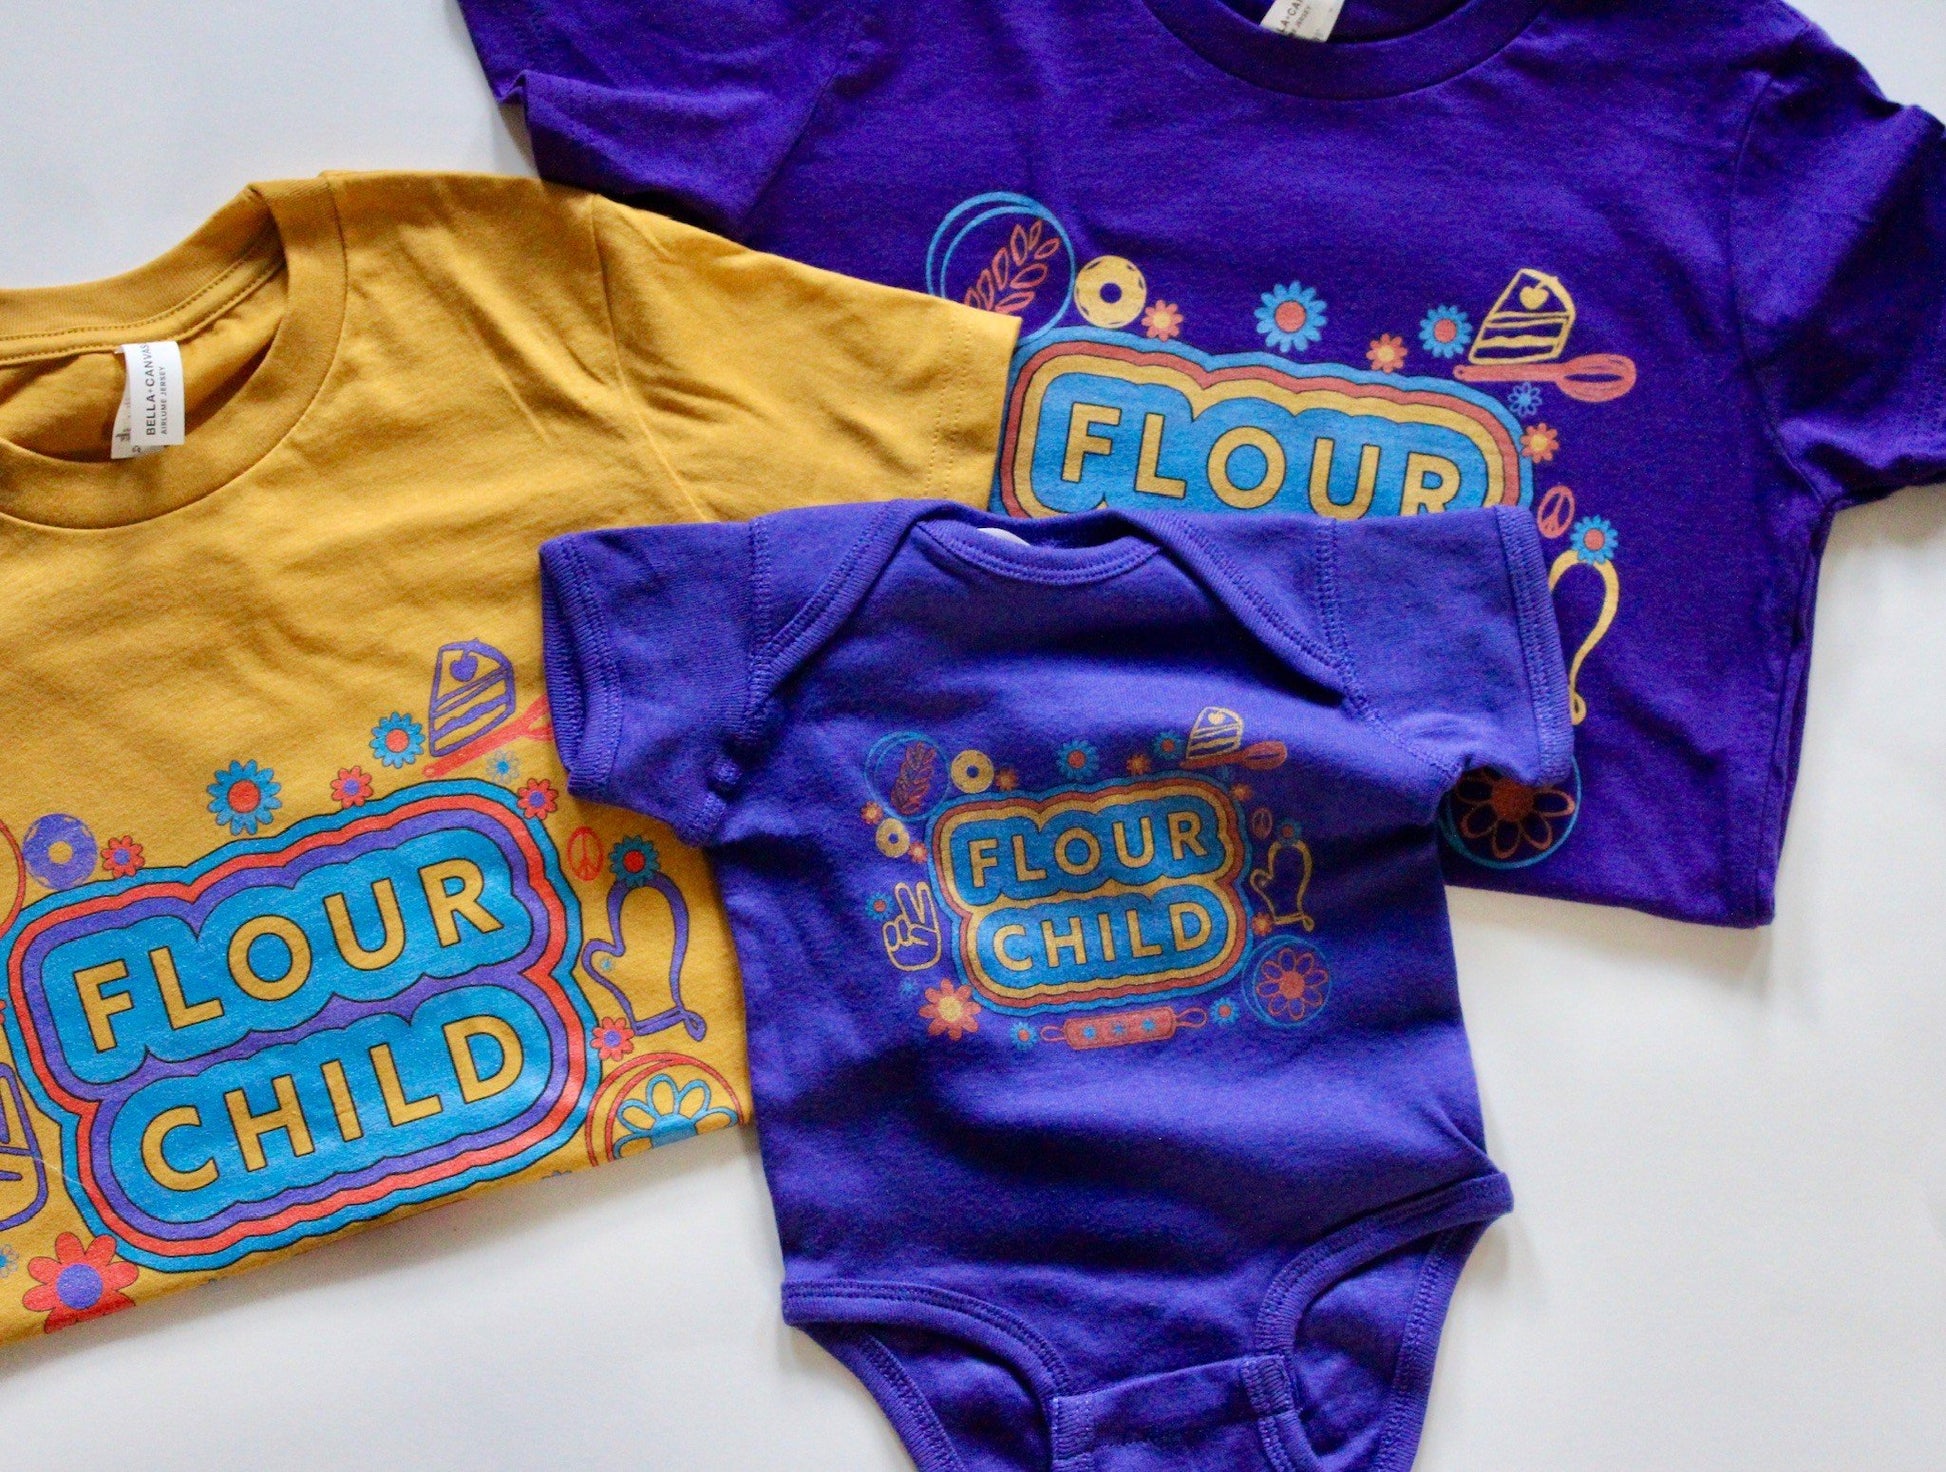 A purple Flour Child onesie and two youth Flour Child t-shirts in yellow and purple